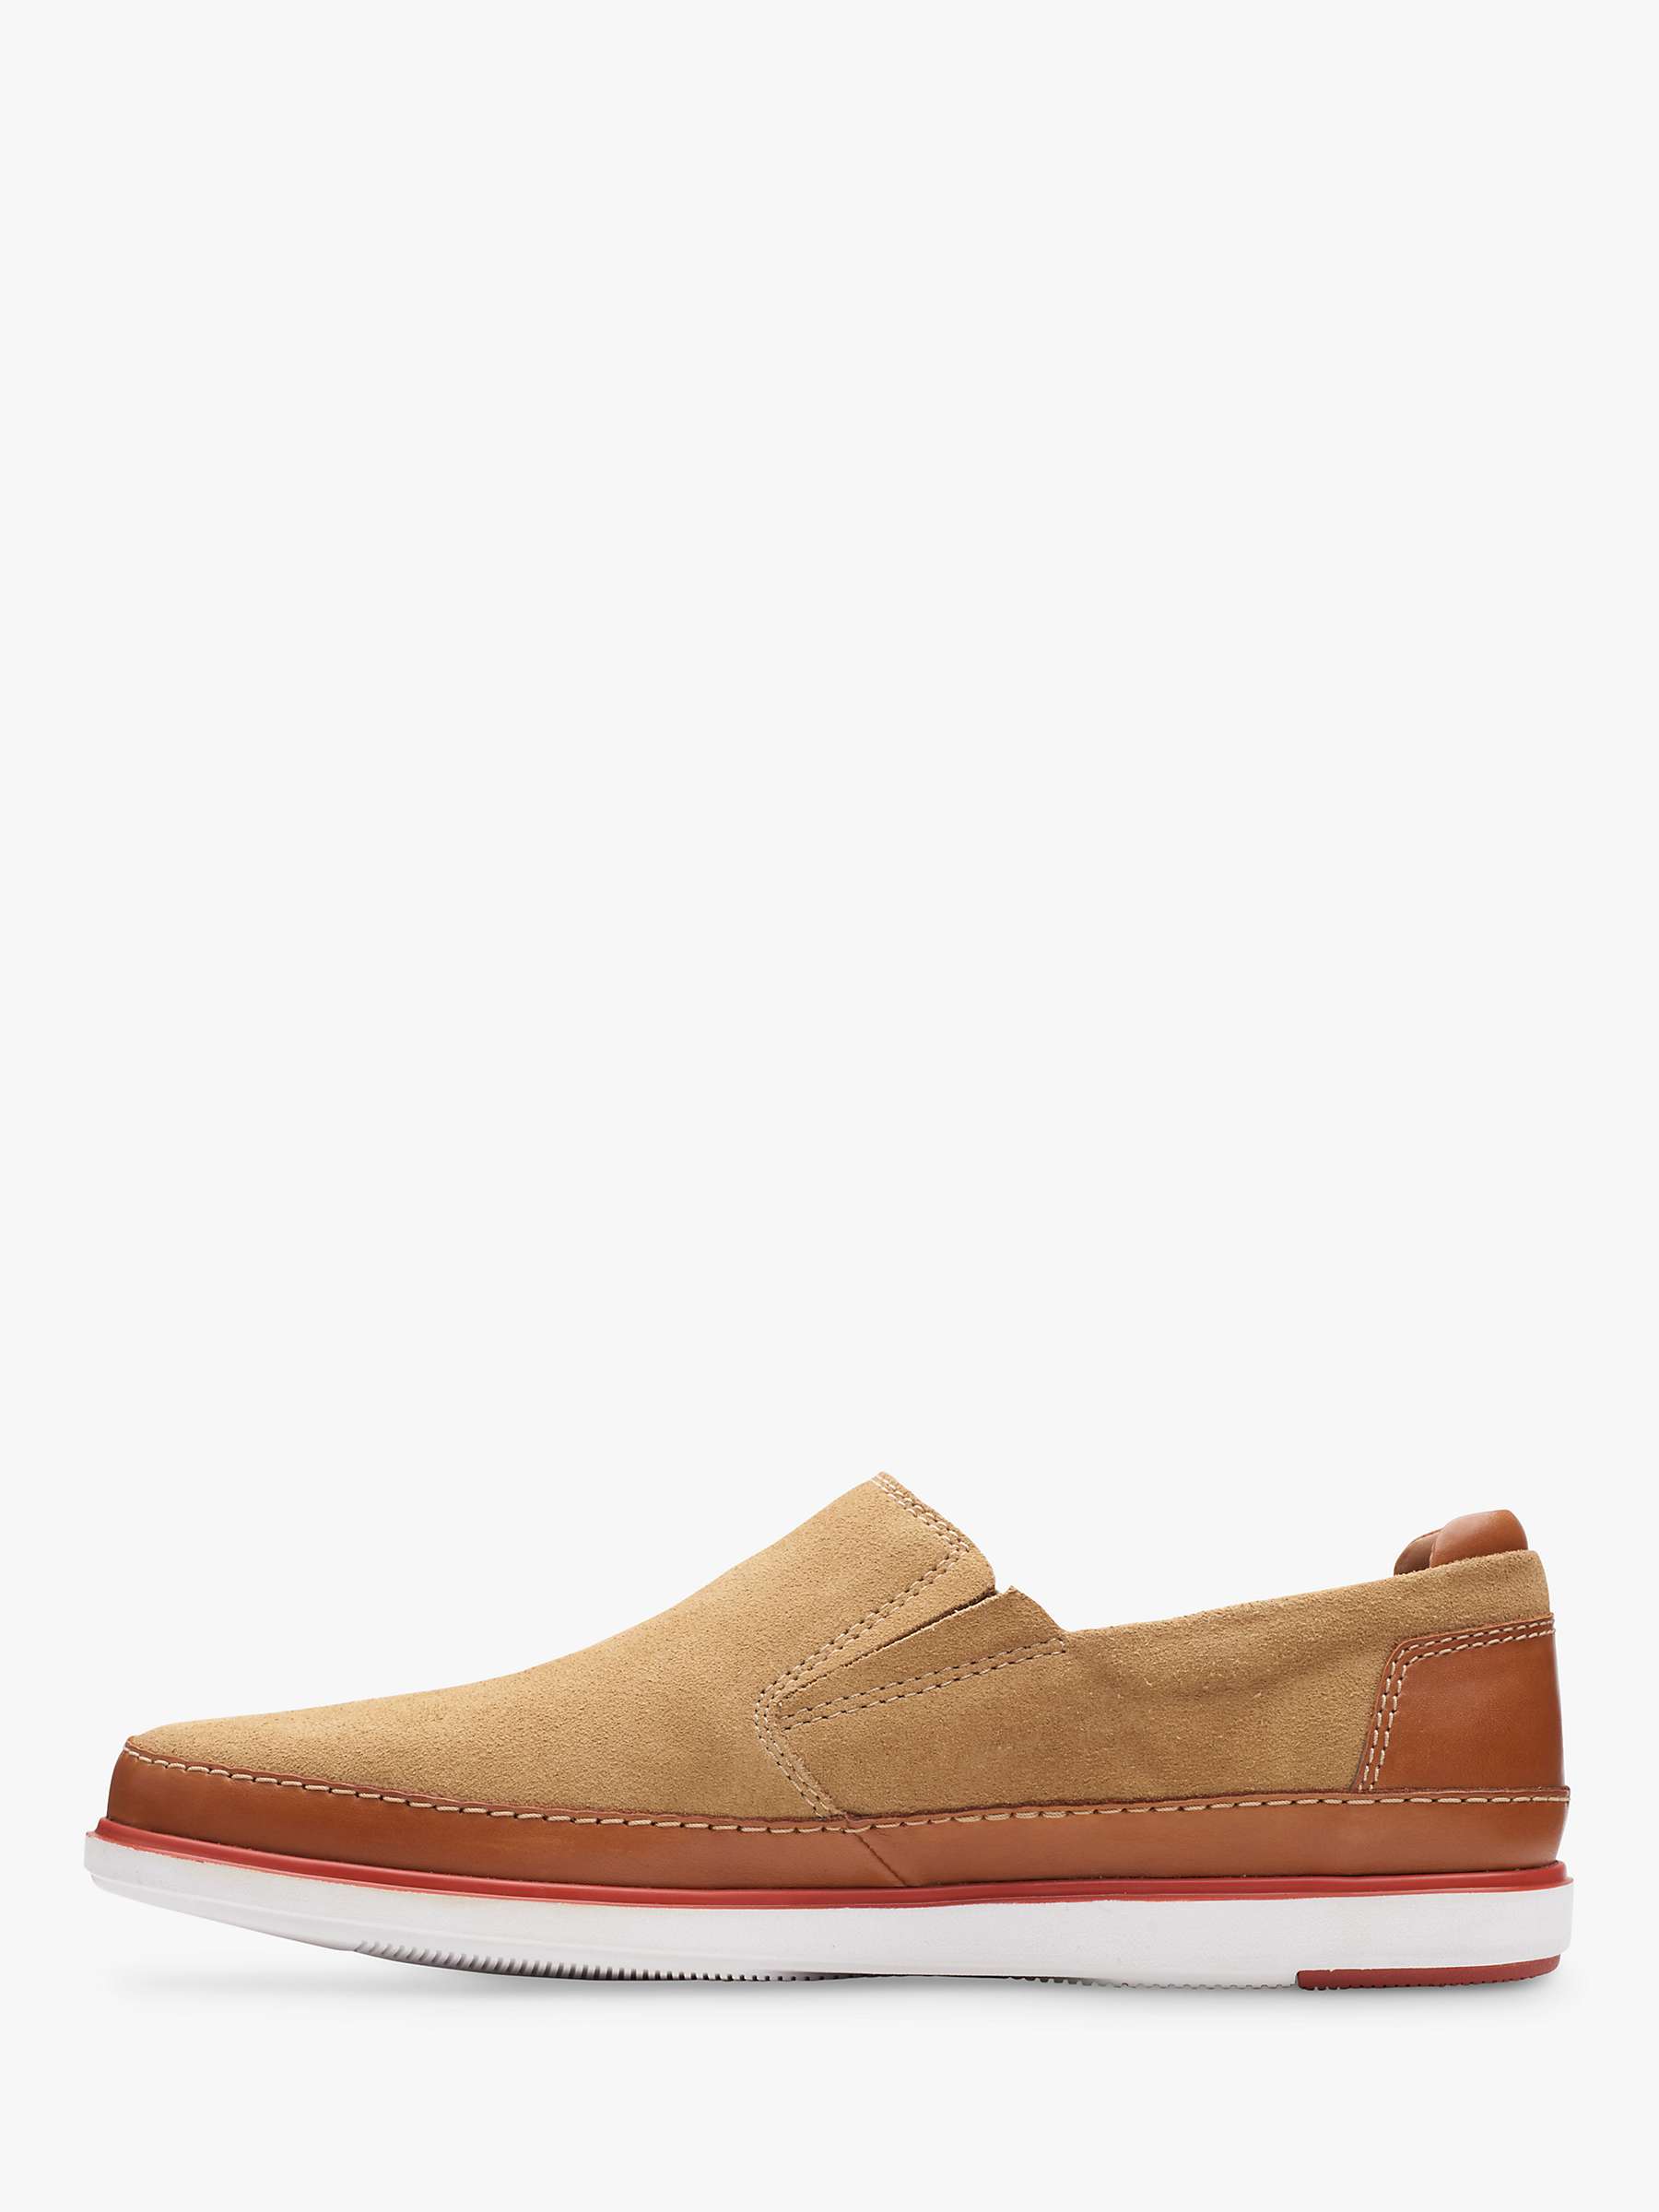 Clarks Bratton Step Suede Loafers, Sand at John Lewis & Partners